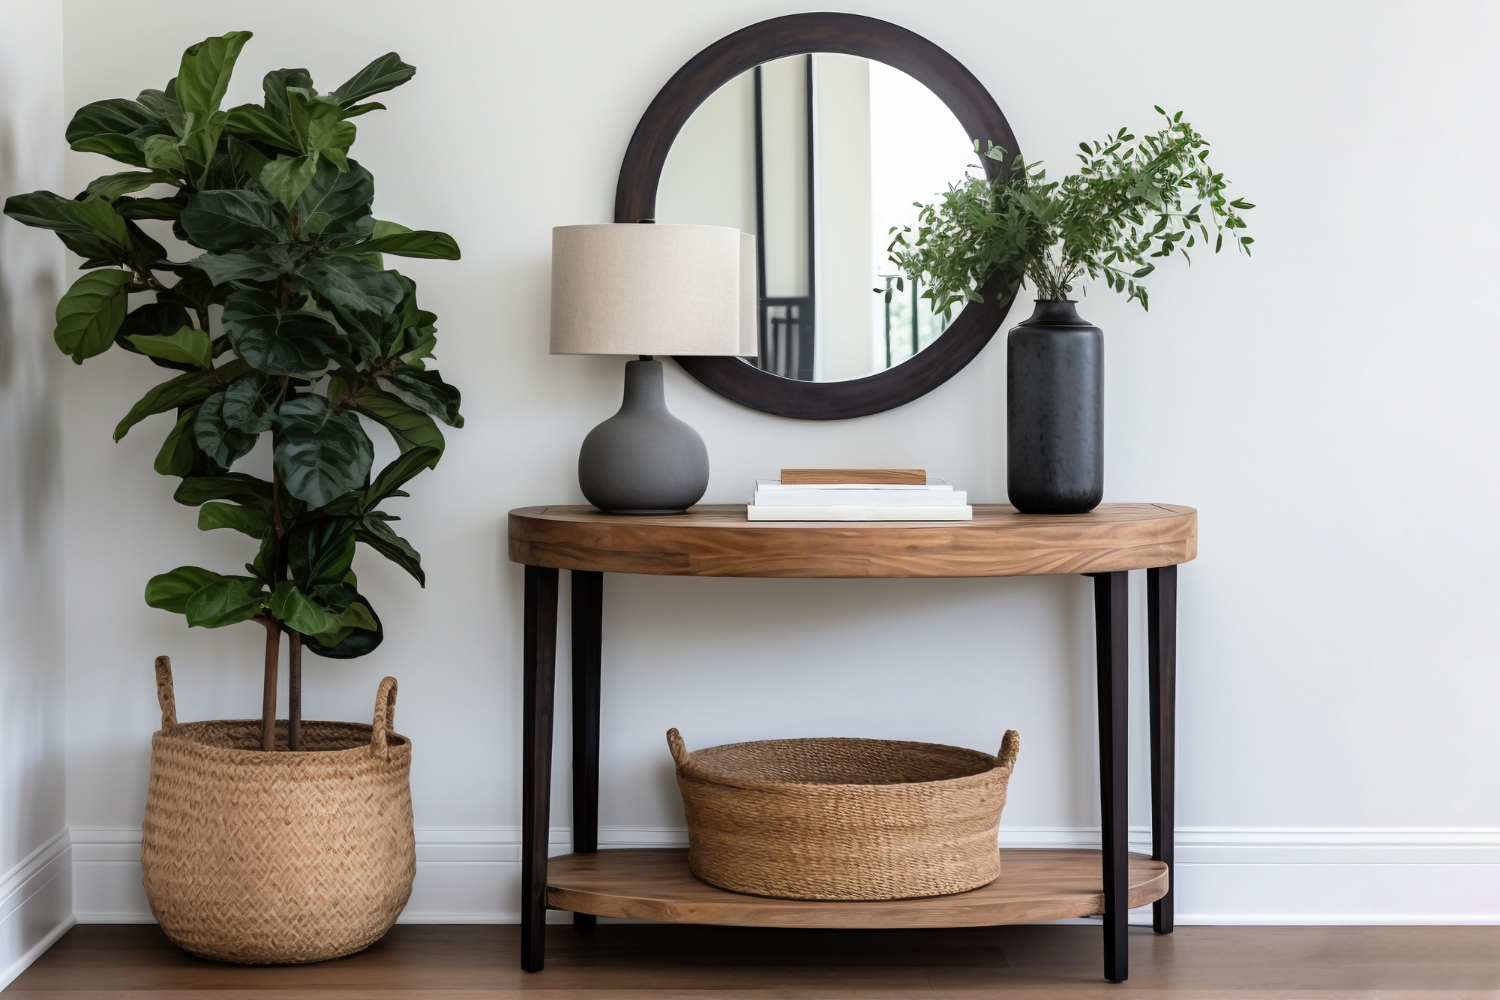  A stylish wooden console table with a mirror and a basket, perfect for adding a touch of elegance to your home decor. #Mirrors #WallDecor #HomeIdeas